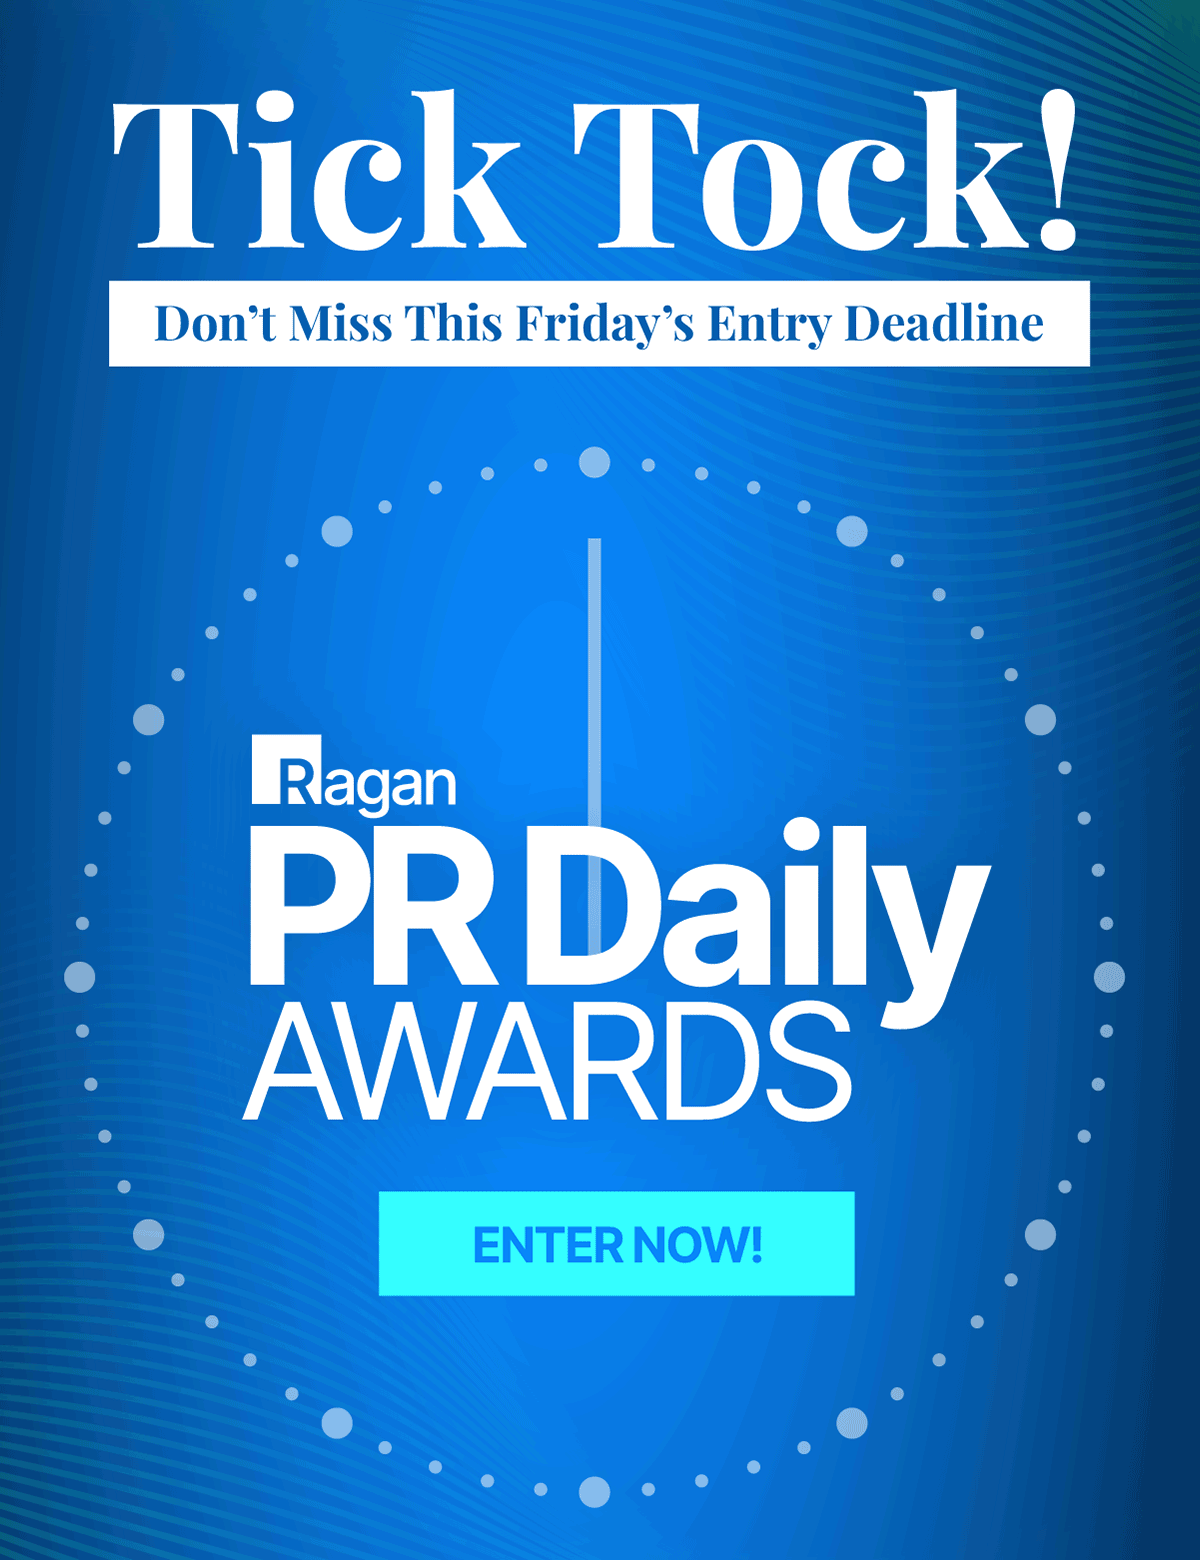 PR Daily Awards | Tick Tock! Don't Miss this Friday's Entry Deadline | Enter Now